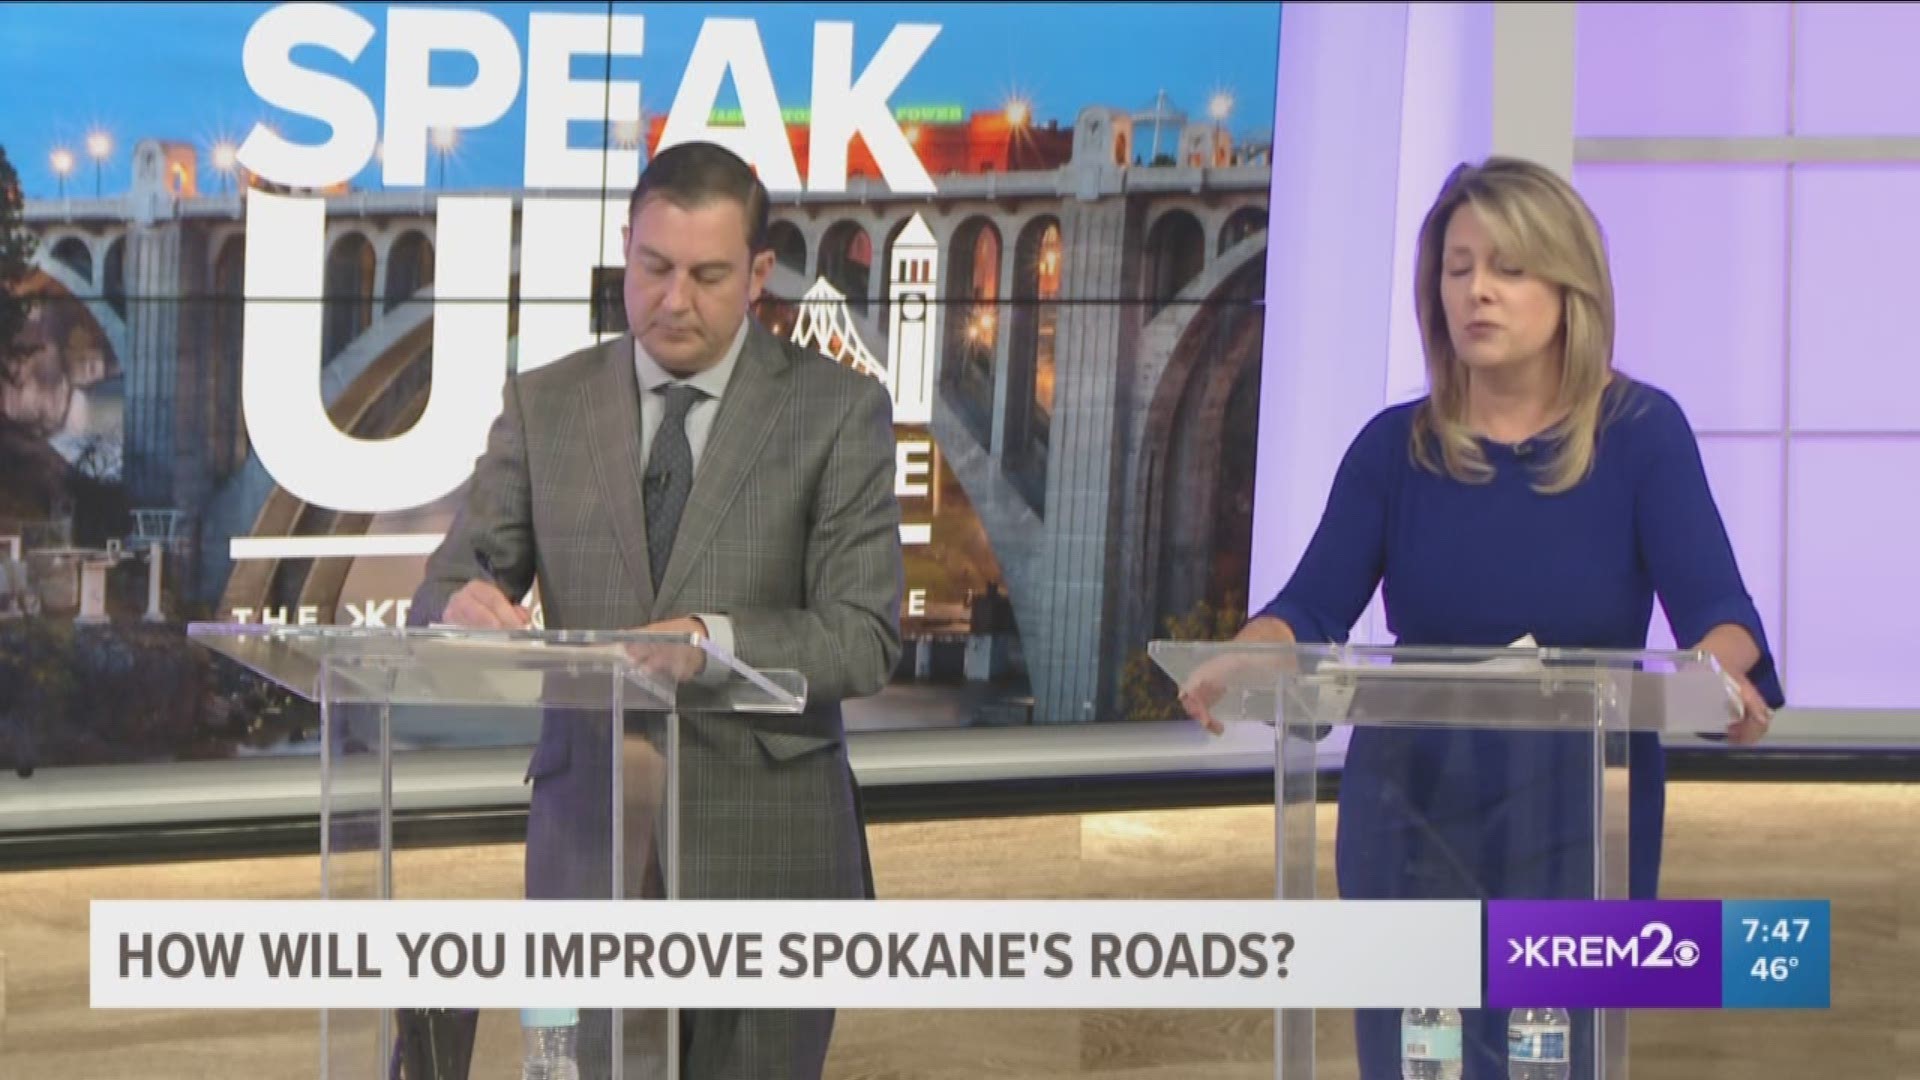 Both candidates respond to a question asking how they plan to improve road conditions in Spokane.